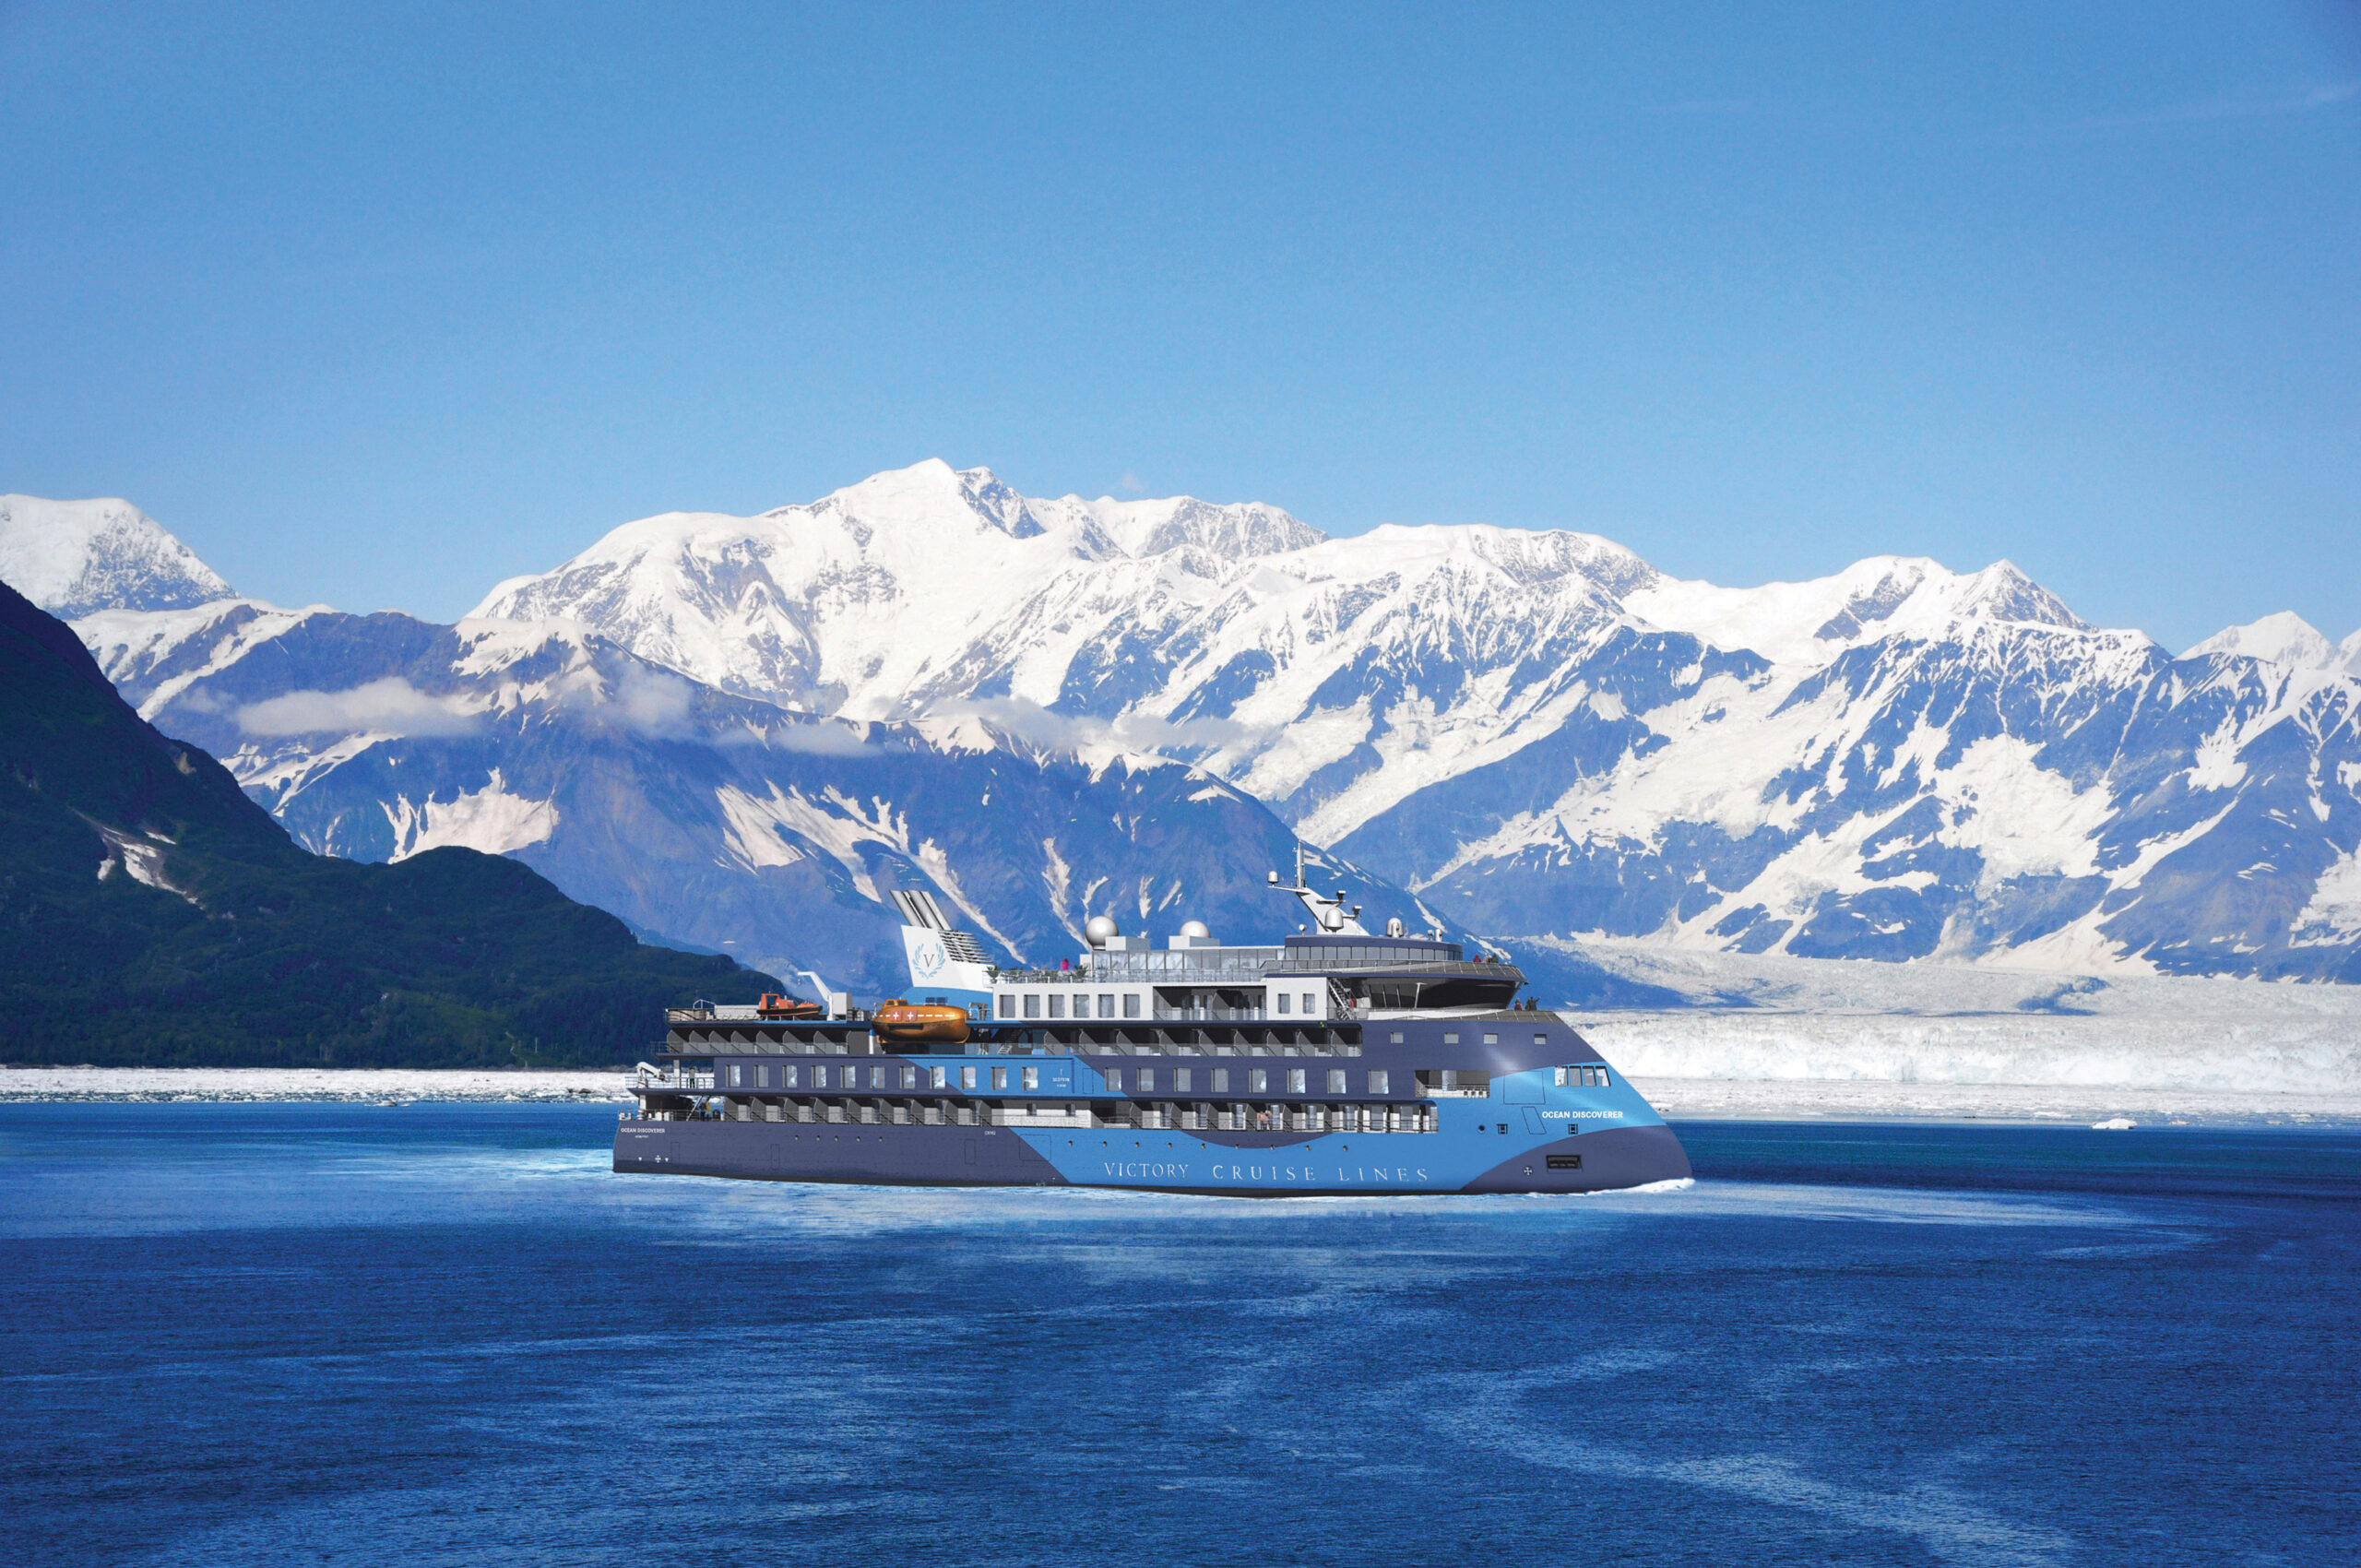 New zerodeposit offer plus savings on 2023 expedition cruises in the